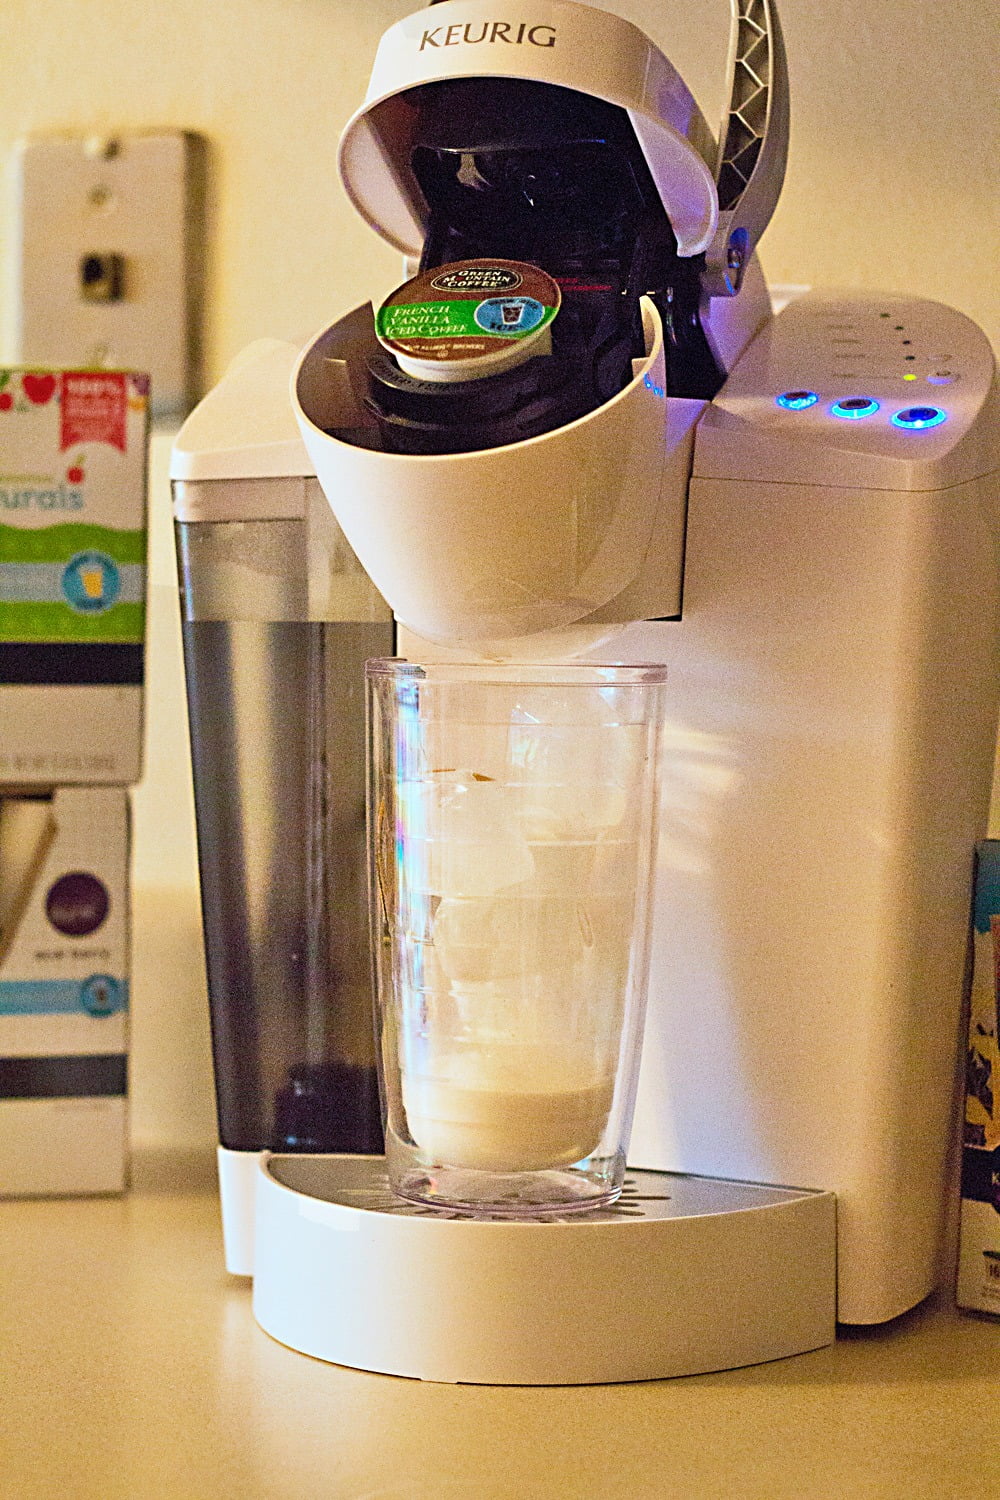 https://www.itsyummi.com/wp-content/uploads/2014/06/how-to-brew-iced-coffee-with-a-Keurig-BrewItUp-BrewOverIce-shop.jpg